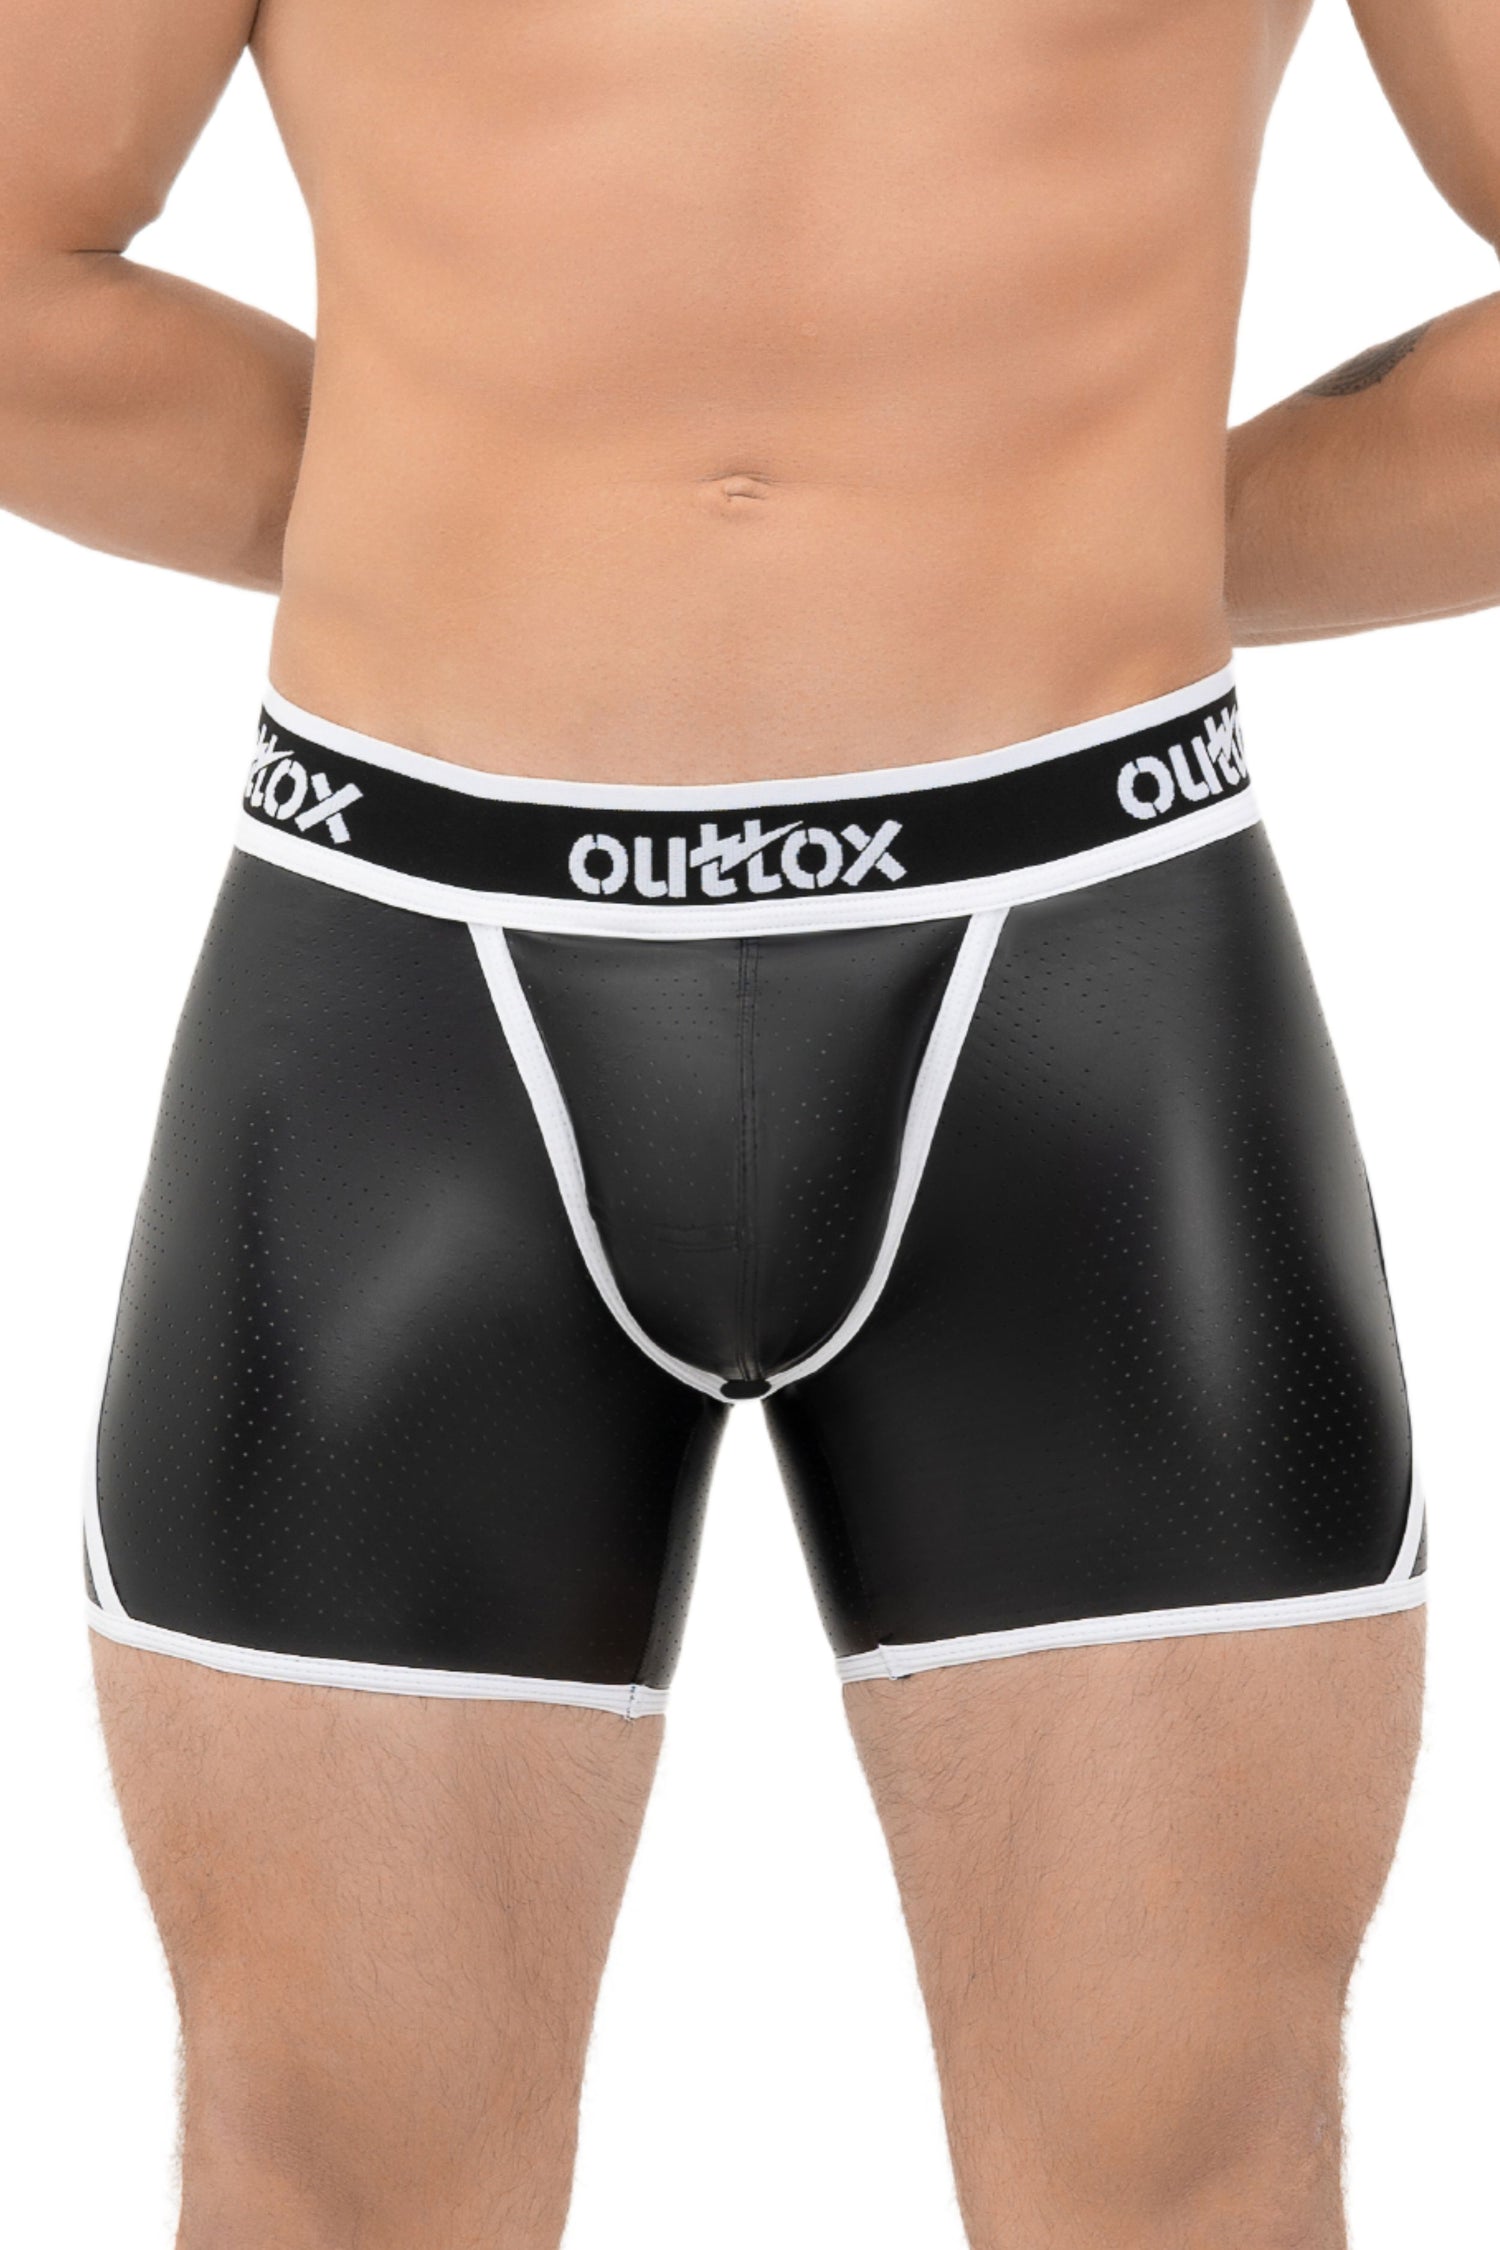 Outtox. Open Rear Shorts with Snap Codpiece. Black+White